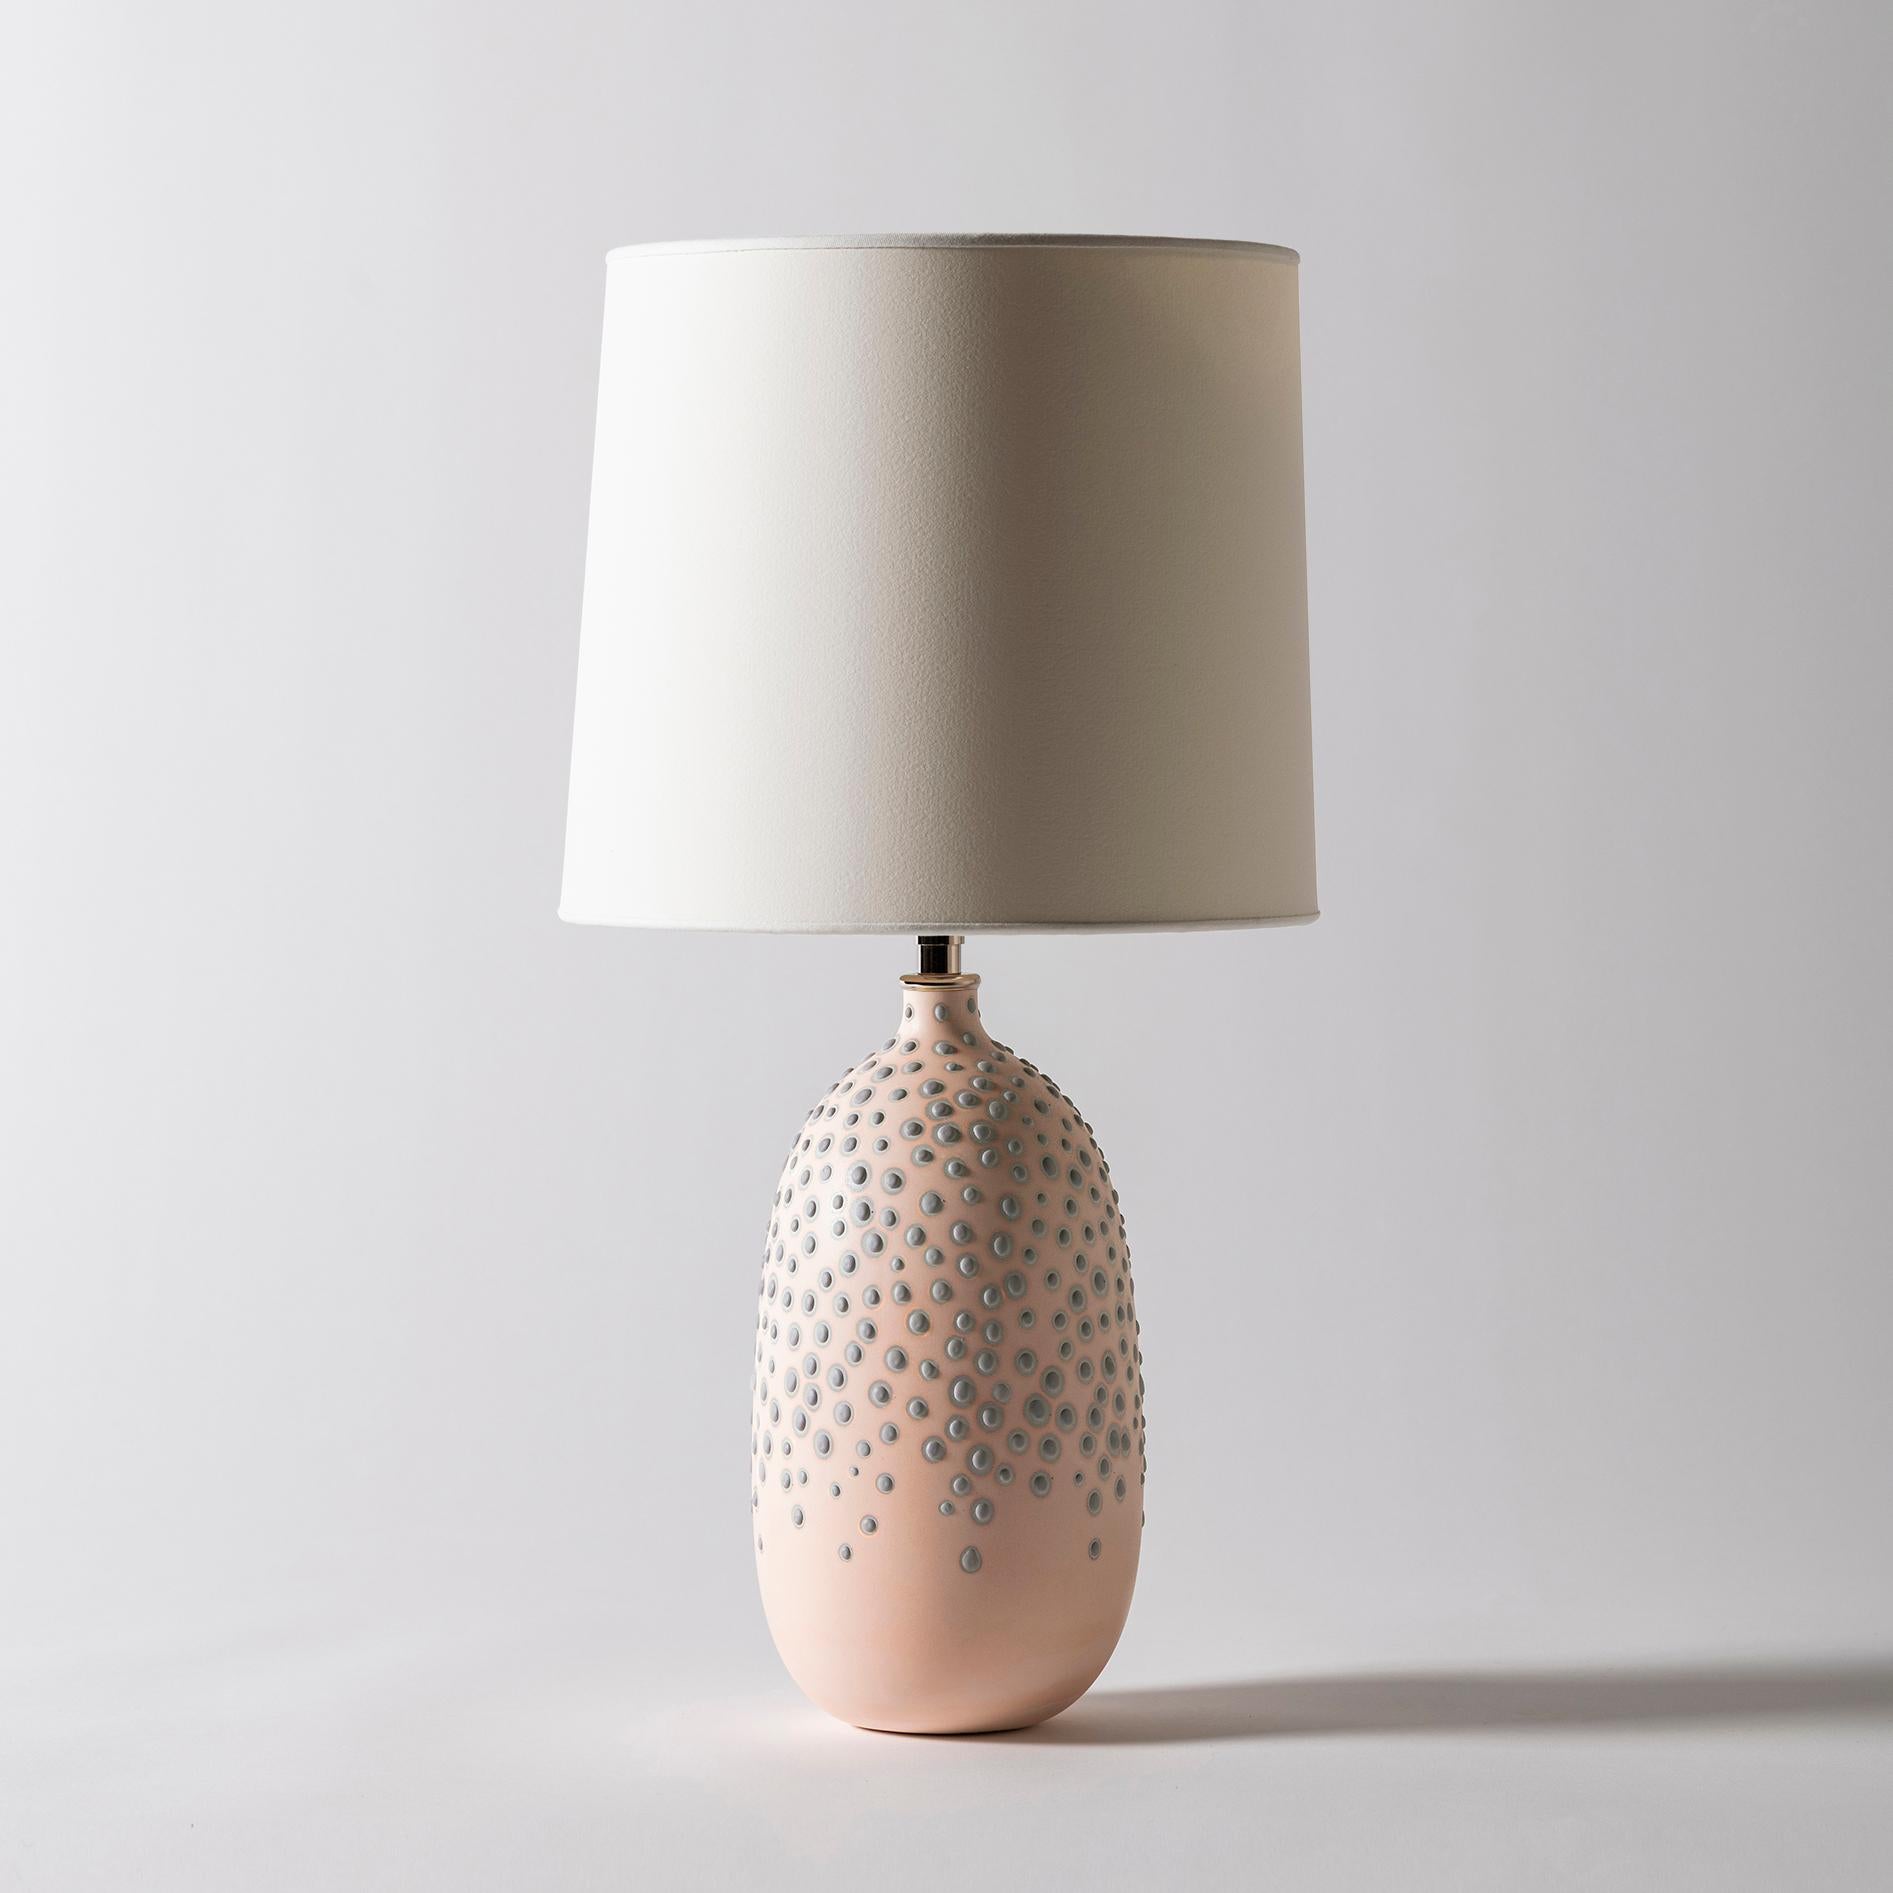 Huxley lamp in Peach by Elyse Graham
Dimensions: D26 x H51 cm
Materials: Plaster, Resin, Cotton rag Paper, brass, Nickel. HARDWARE: POLISHED NICKEL-PLATED BRASS UNO THREADED SOCKET
with TURN KEY SWITCH, IN-LINE DIMMER.
MOLDED, DYED, AND FINISHED